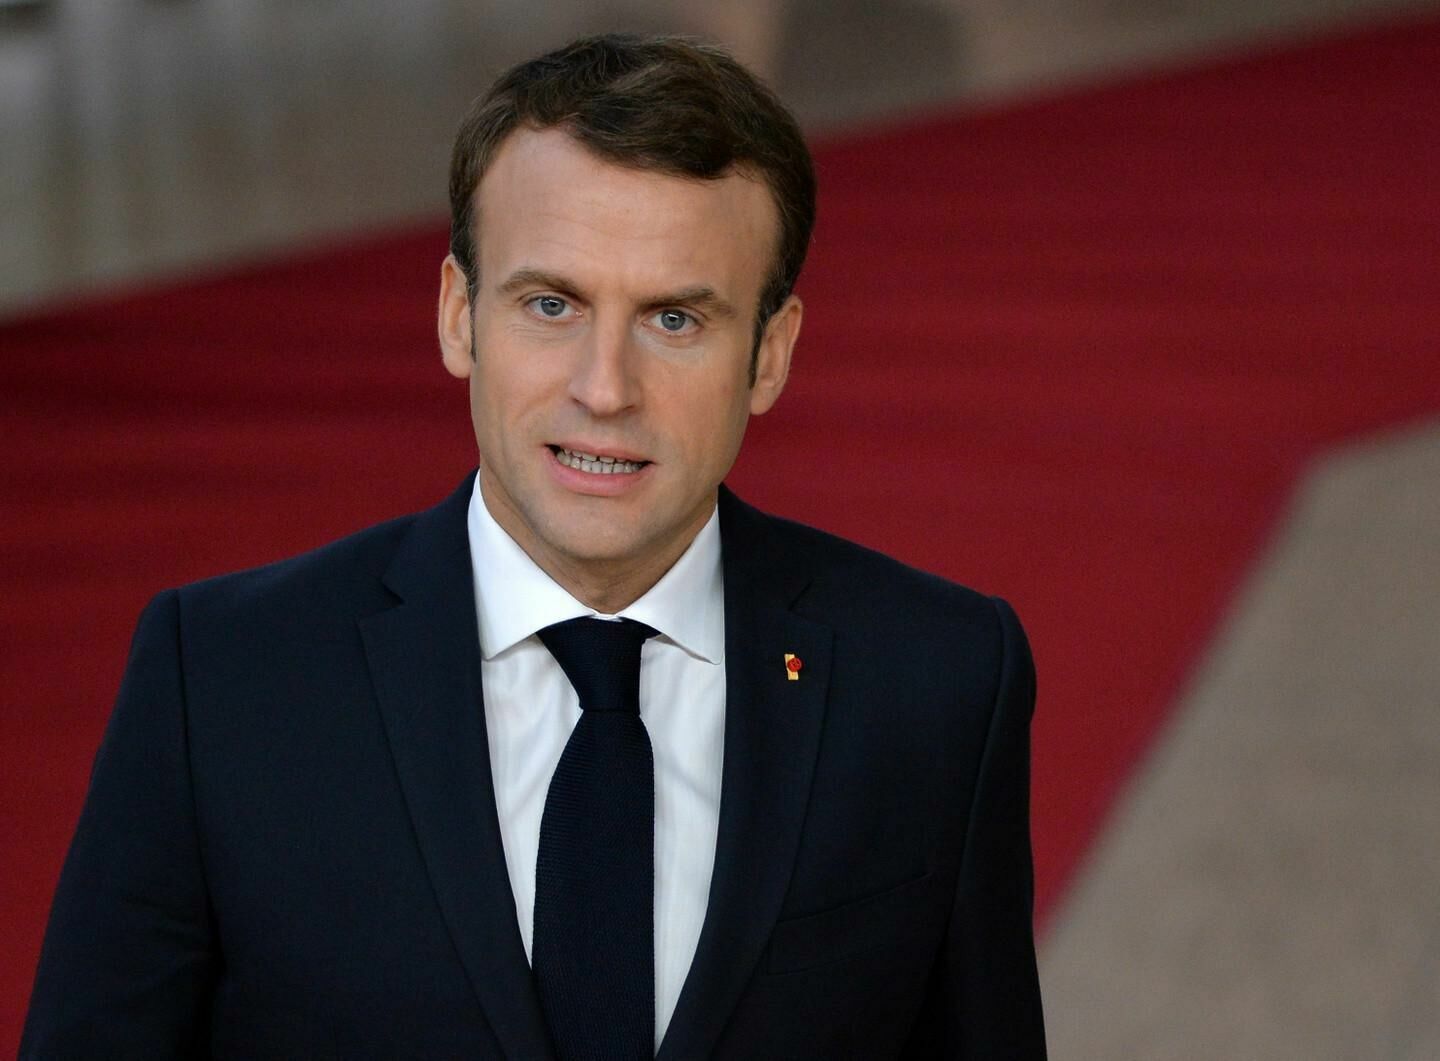 Emmanuel Macron said the need for constant contacts with Vladimir Putin